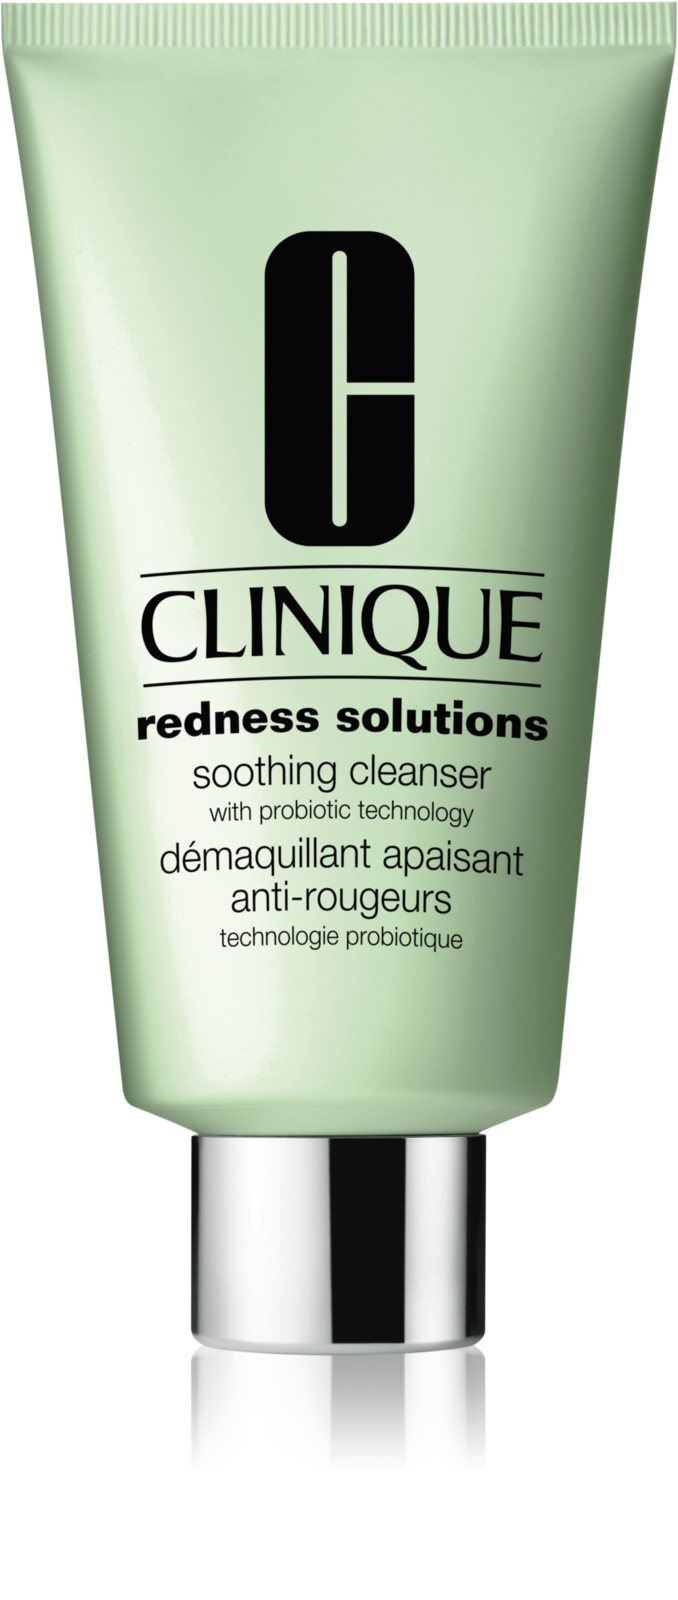 Soothing cleanser. Clinique redness solutions Soothing Cleanser. Clinique Cleanser. Clinique для умывания. Clinique Anti-Blemish solutions.